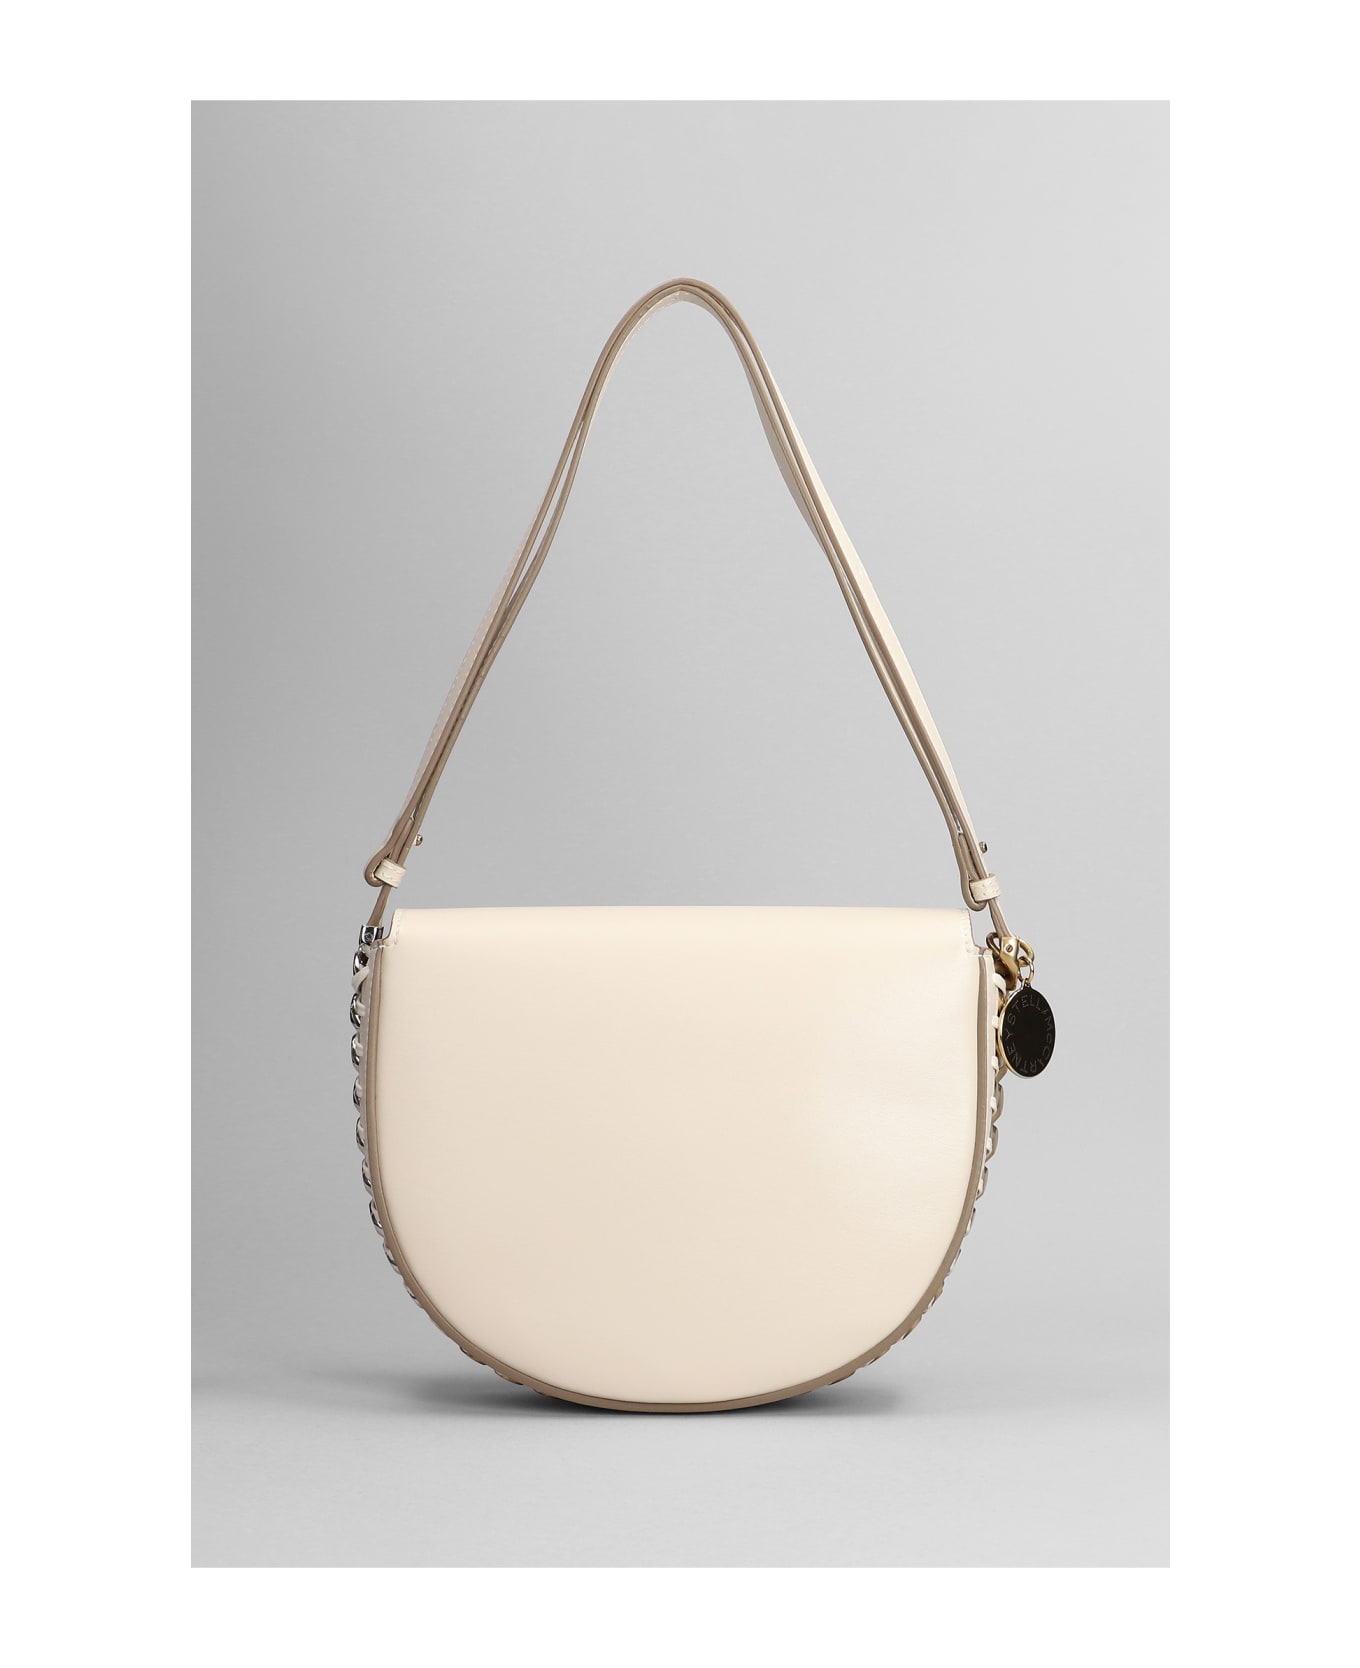 Stella McCartney Hand Bag In White Faux Leather - white